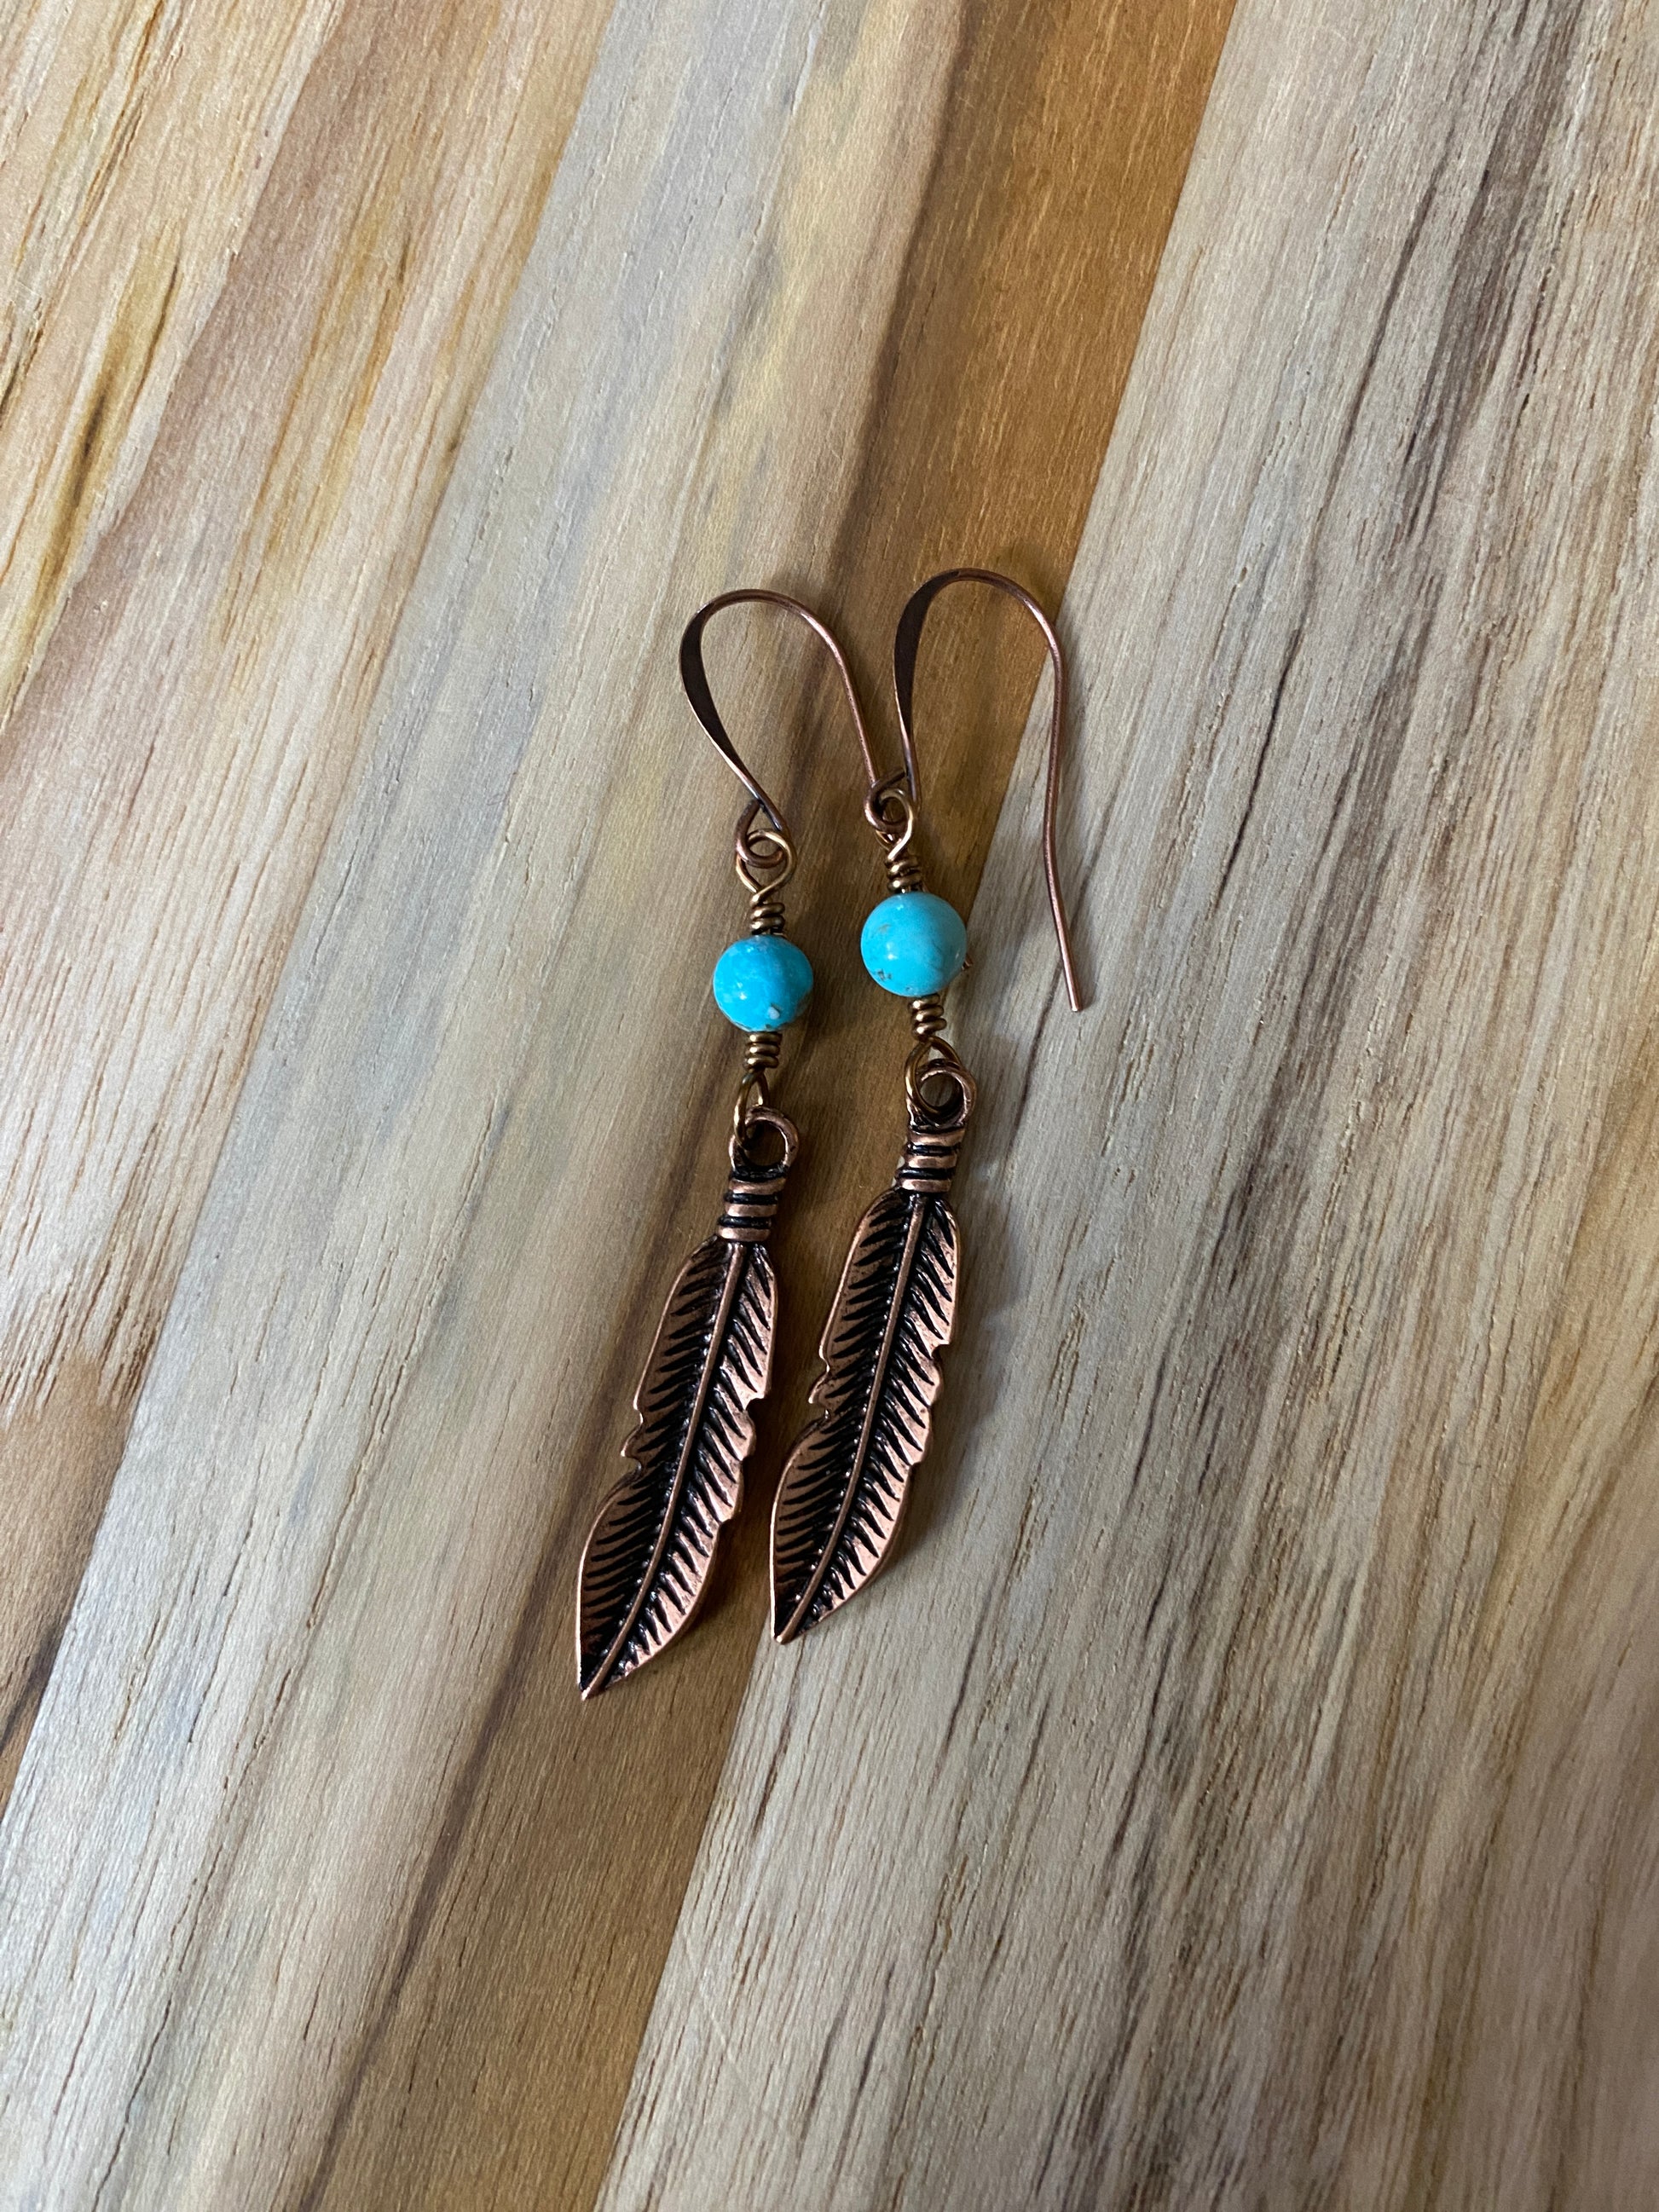 Long Copper Feather Dangle Earrings with Turquoise Bead - My Urban Gems